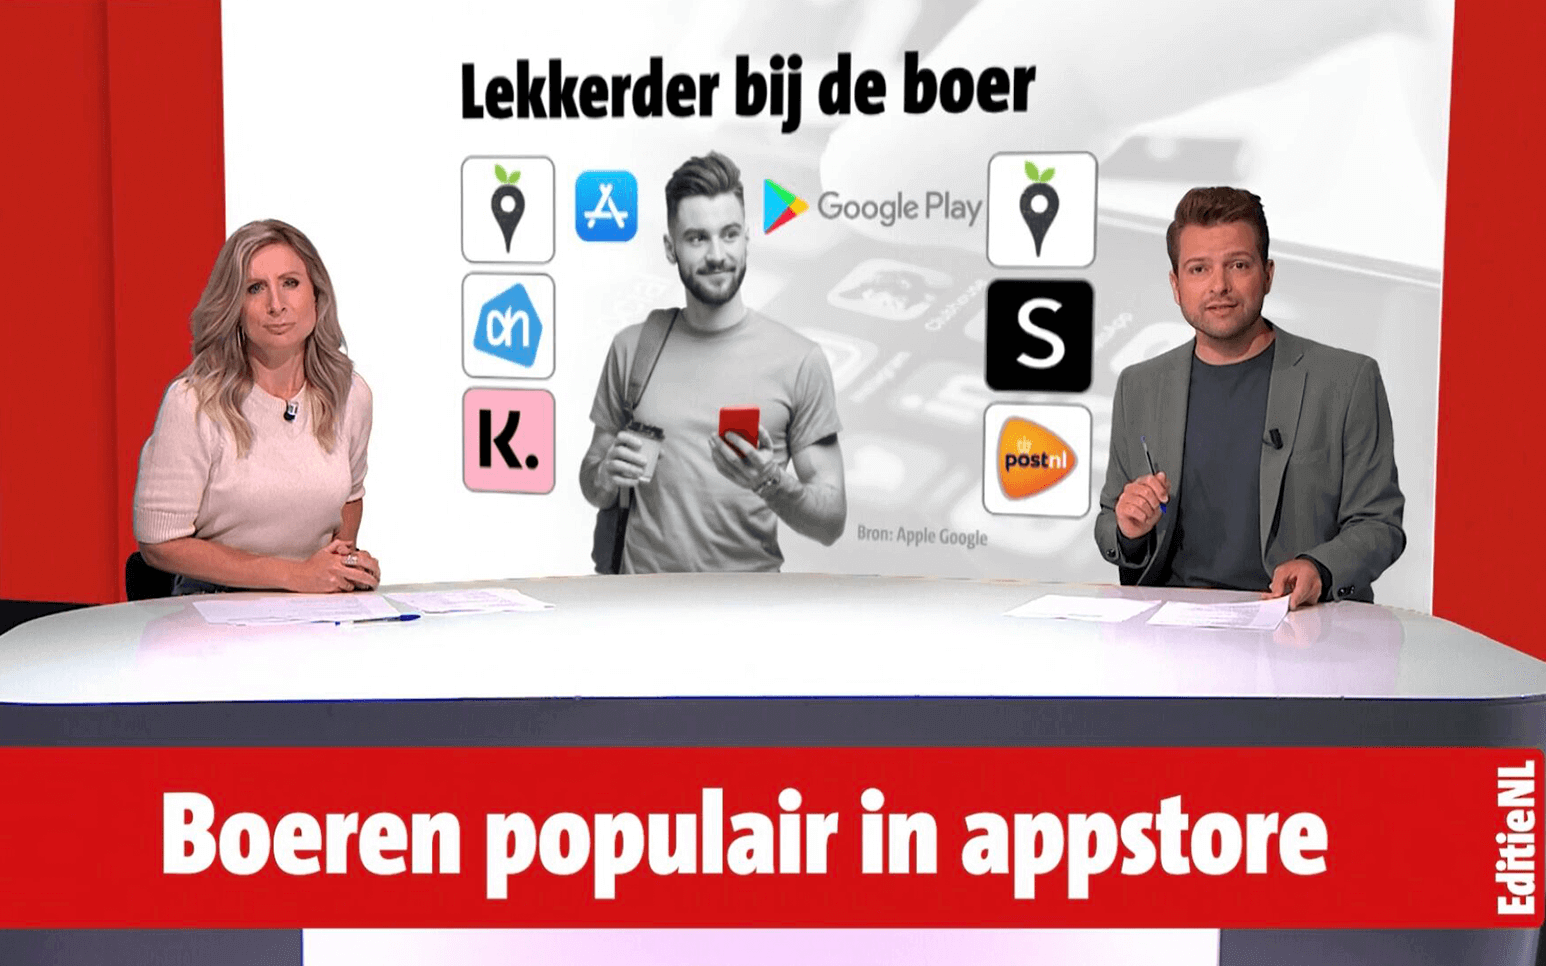 Lekkerder bij de boer: an hit in the app stores and with the pers